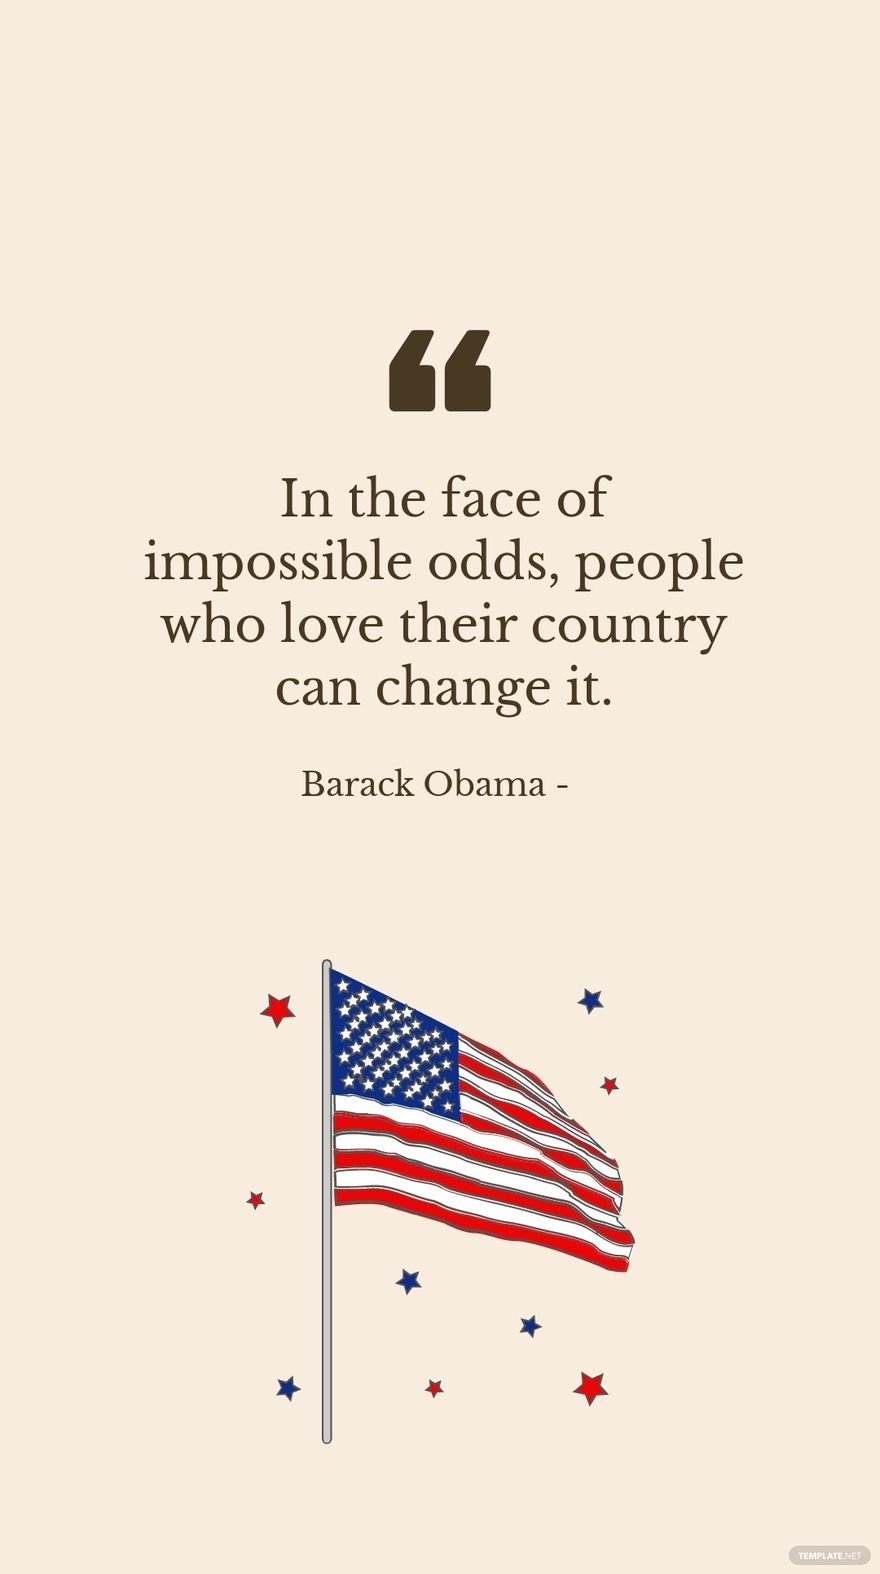 Free Barack Obama - In the face of impossible odds, people who love their country can change it.